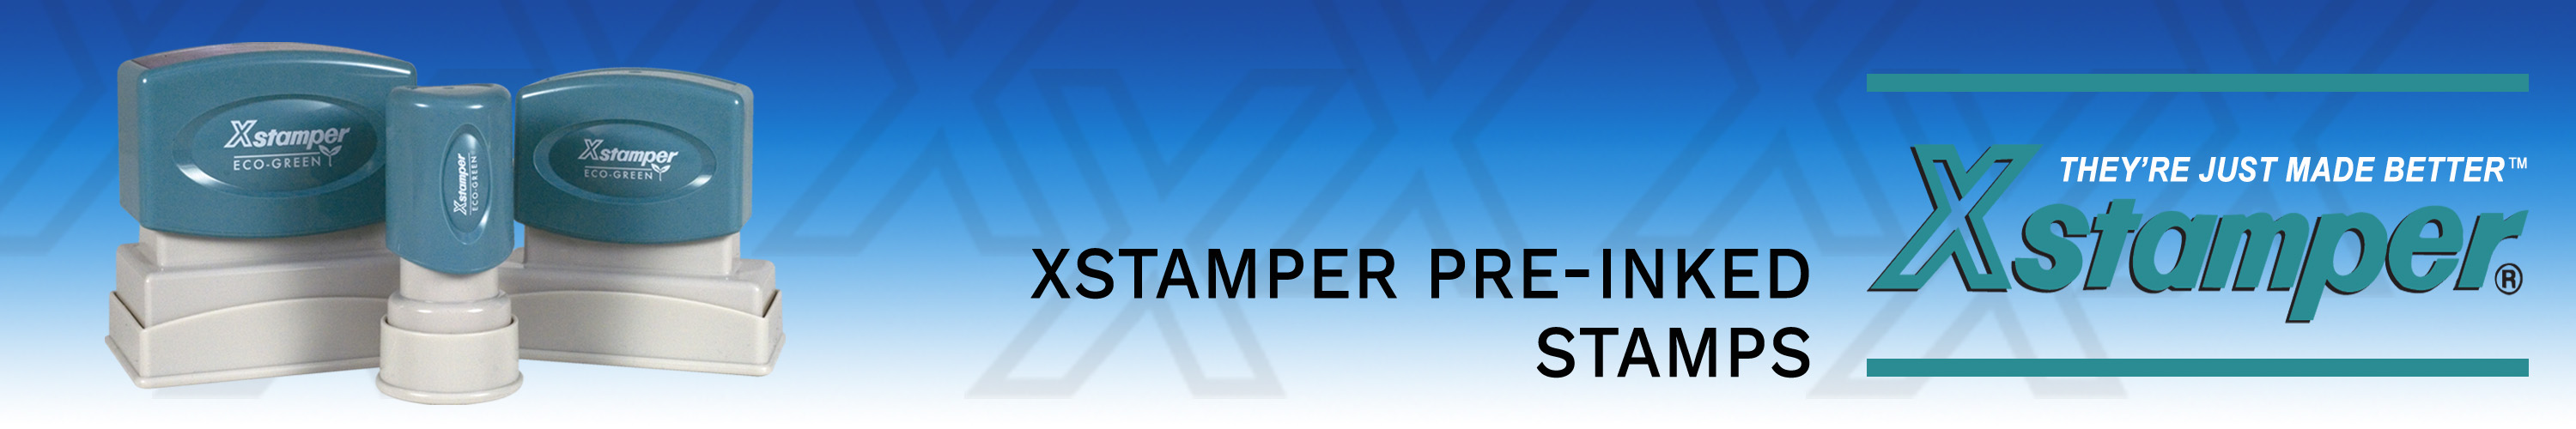 Xstamper Rubber Stamps made and shipped daily from Stamp-Connection.